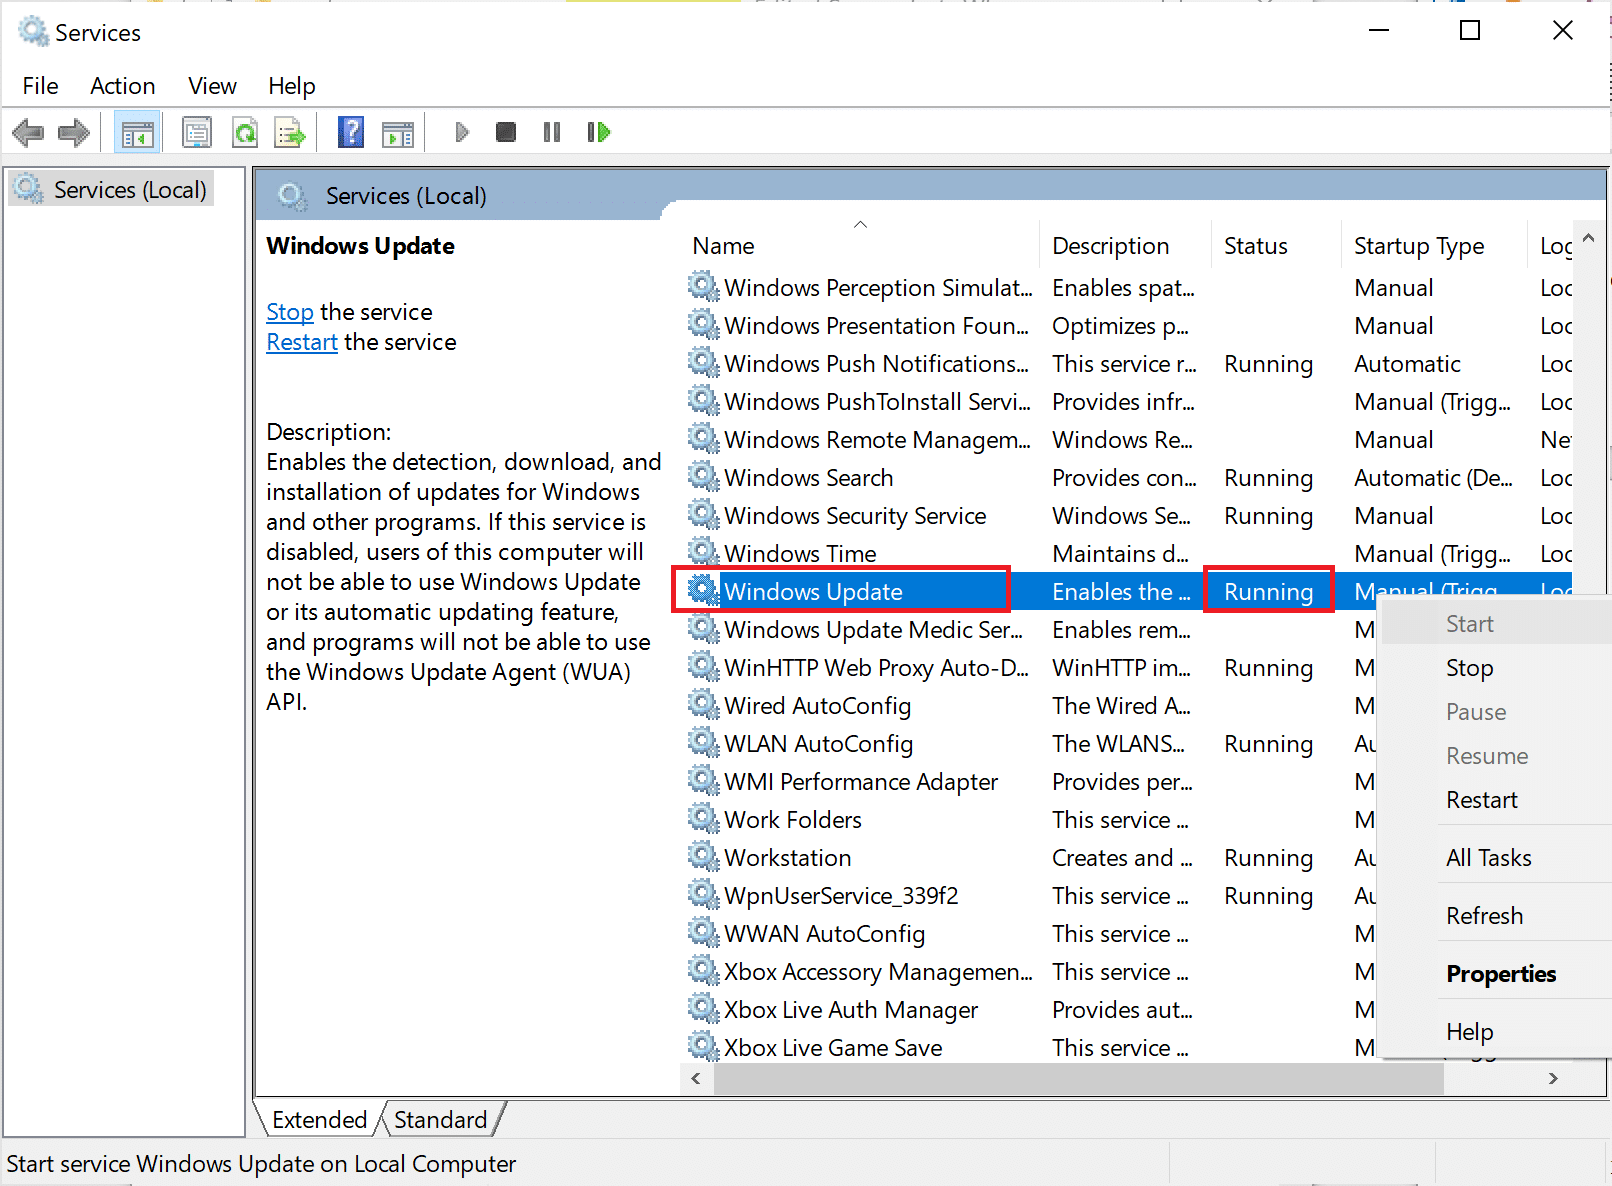 Right-click on Windows Update service and choose Start